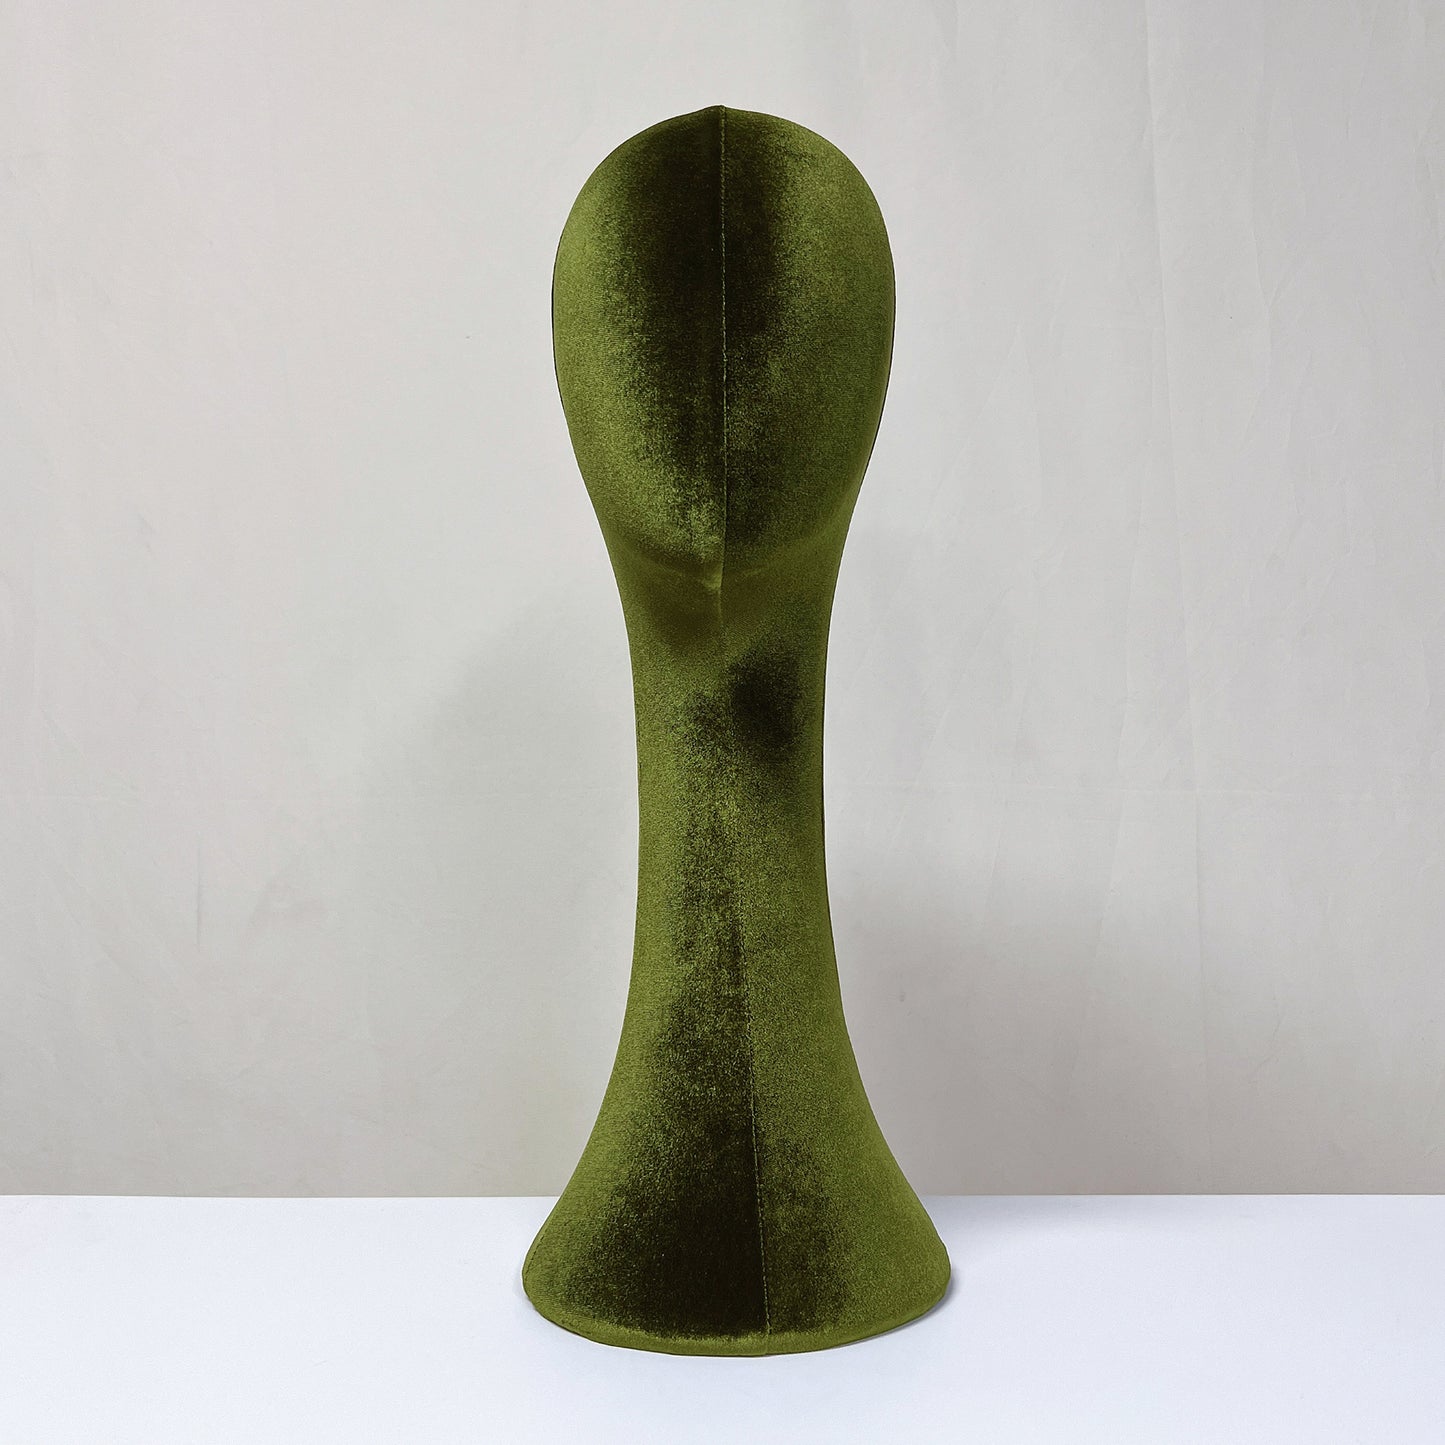 Luxurious Olive-Green Velvet Head Model, Can Pinnable Cloth Head Mannequin, Head Hat Stand/Display, Lace Head Wig Stand, Hat Rack W/ Fabric